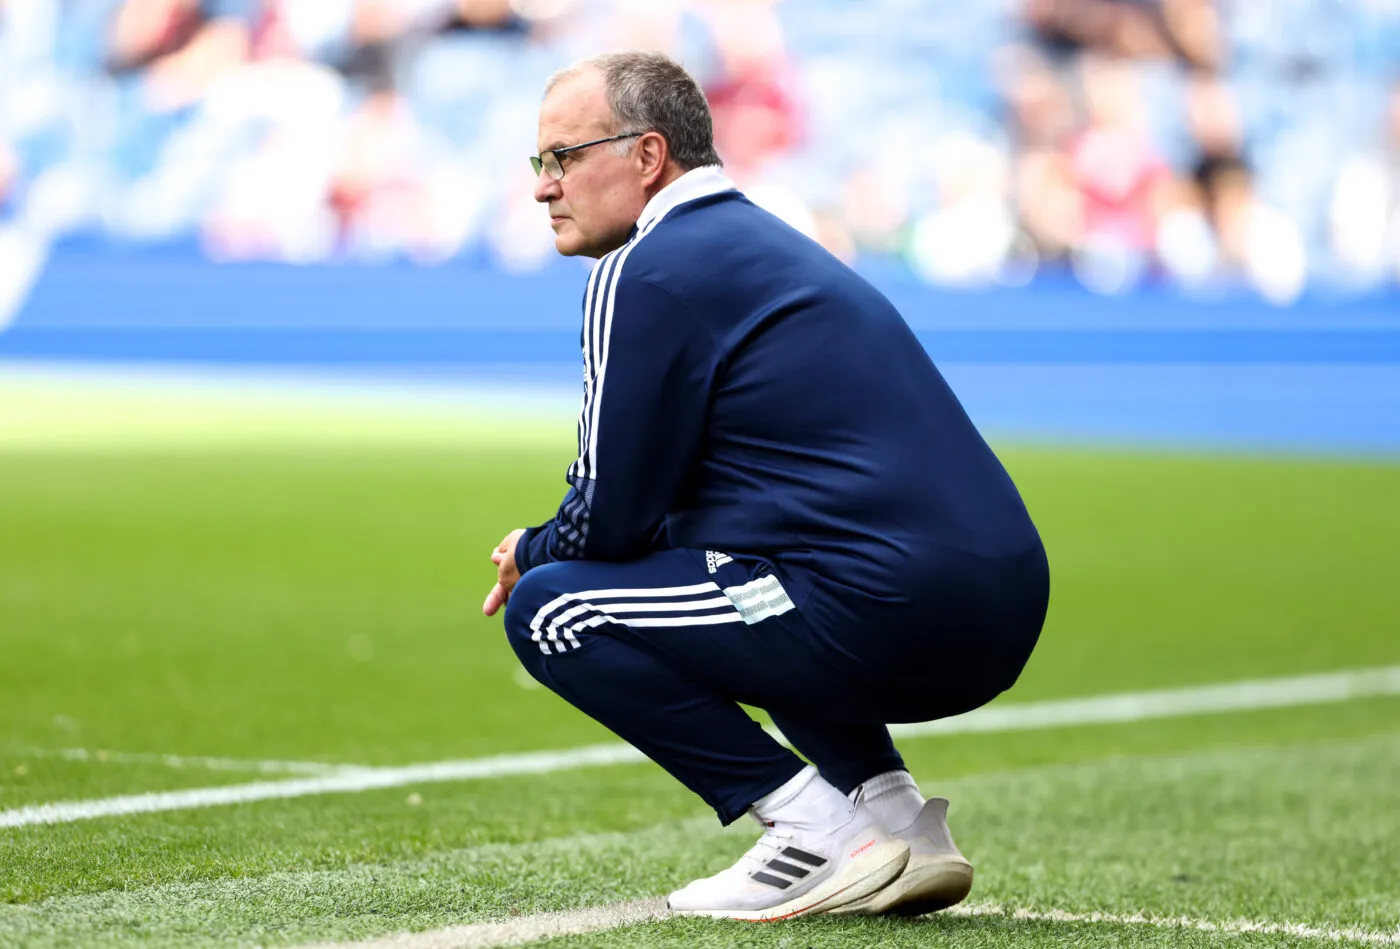 Leeds United manager Marcelo Bielsa on the touchline during the Premier League match at Turf Moor, Burnley. Picture date: Sunday August 29, 2021. 